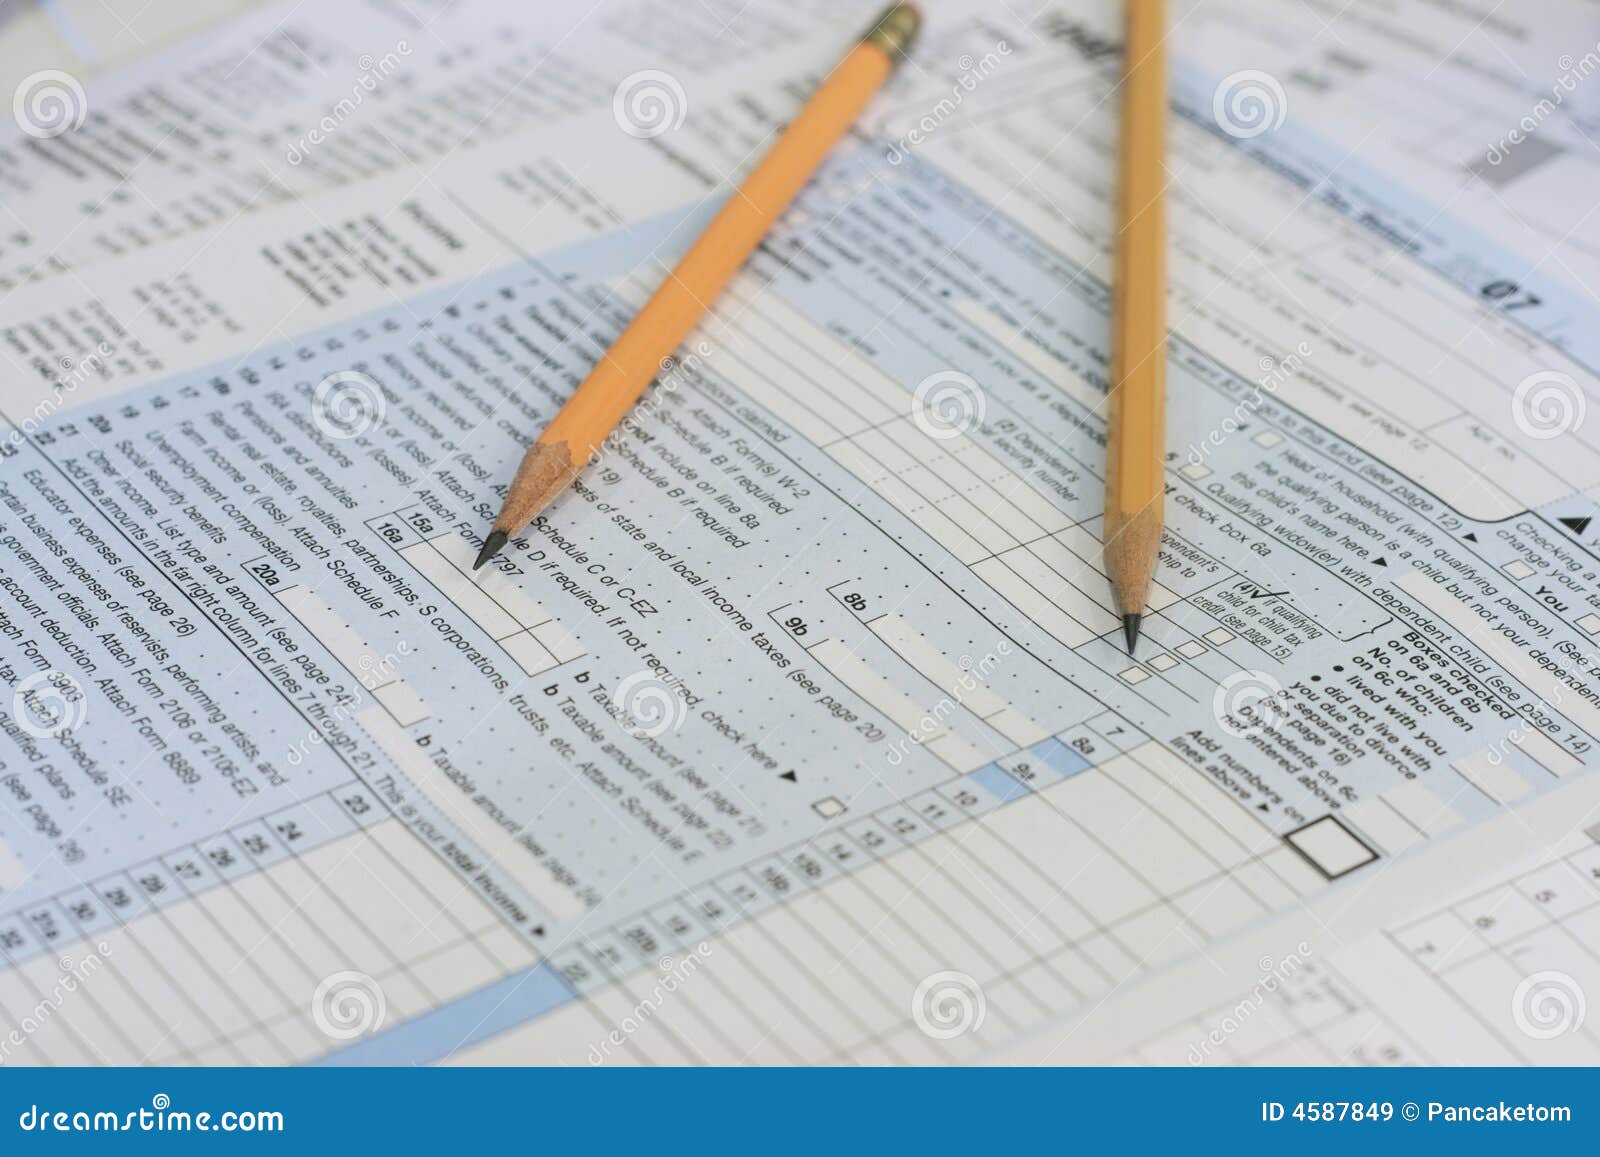 pencils on tax forms